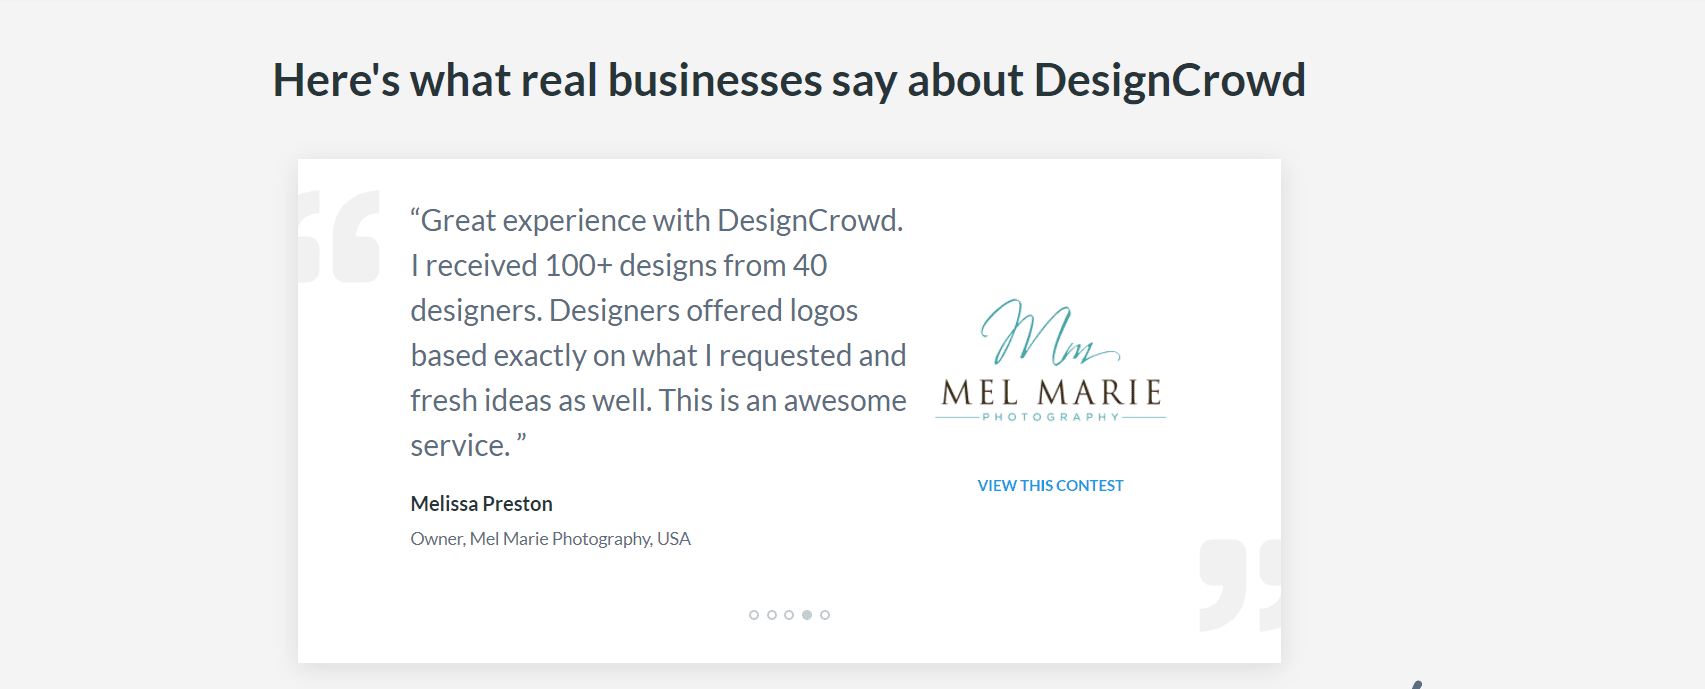 DesignCrowd reviews by business